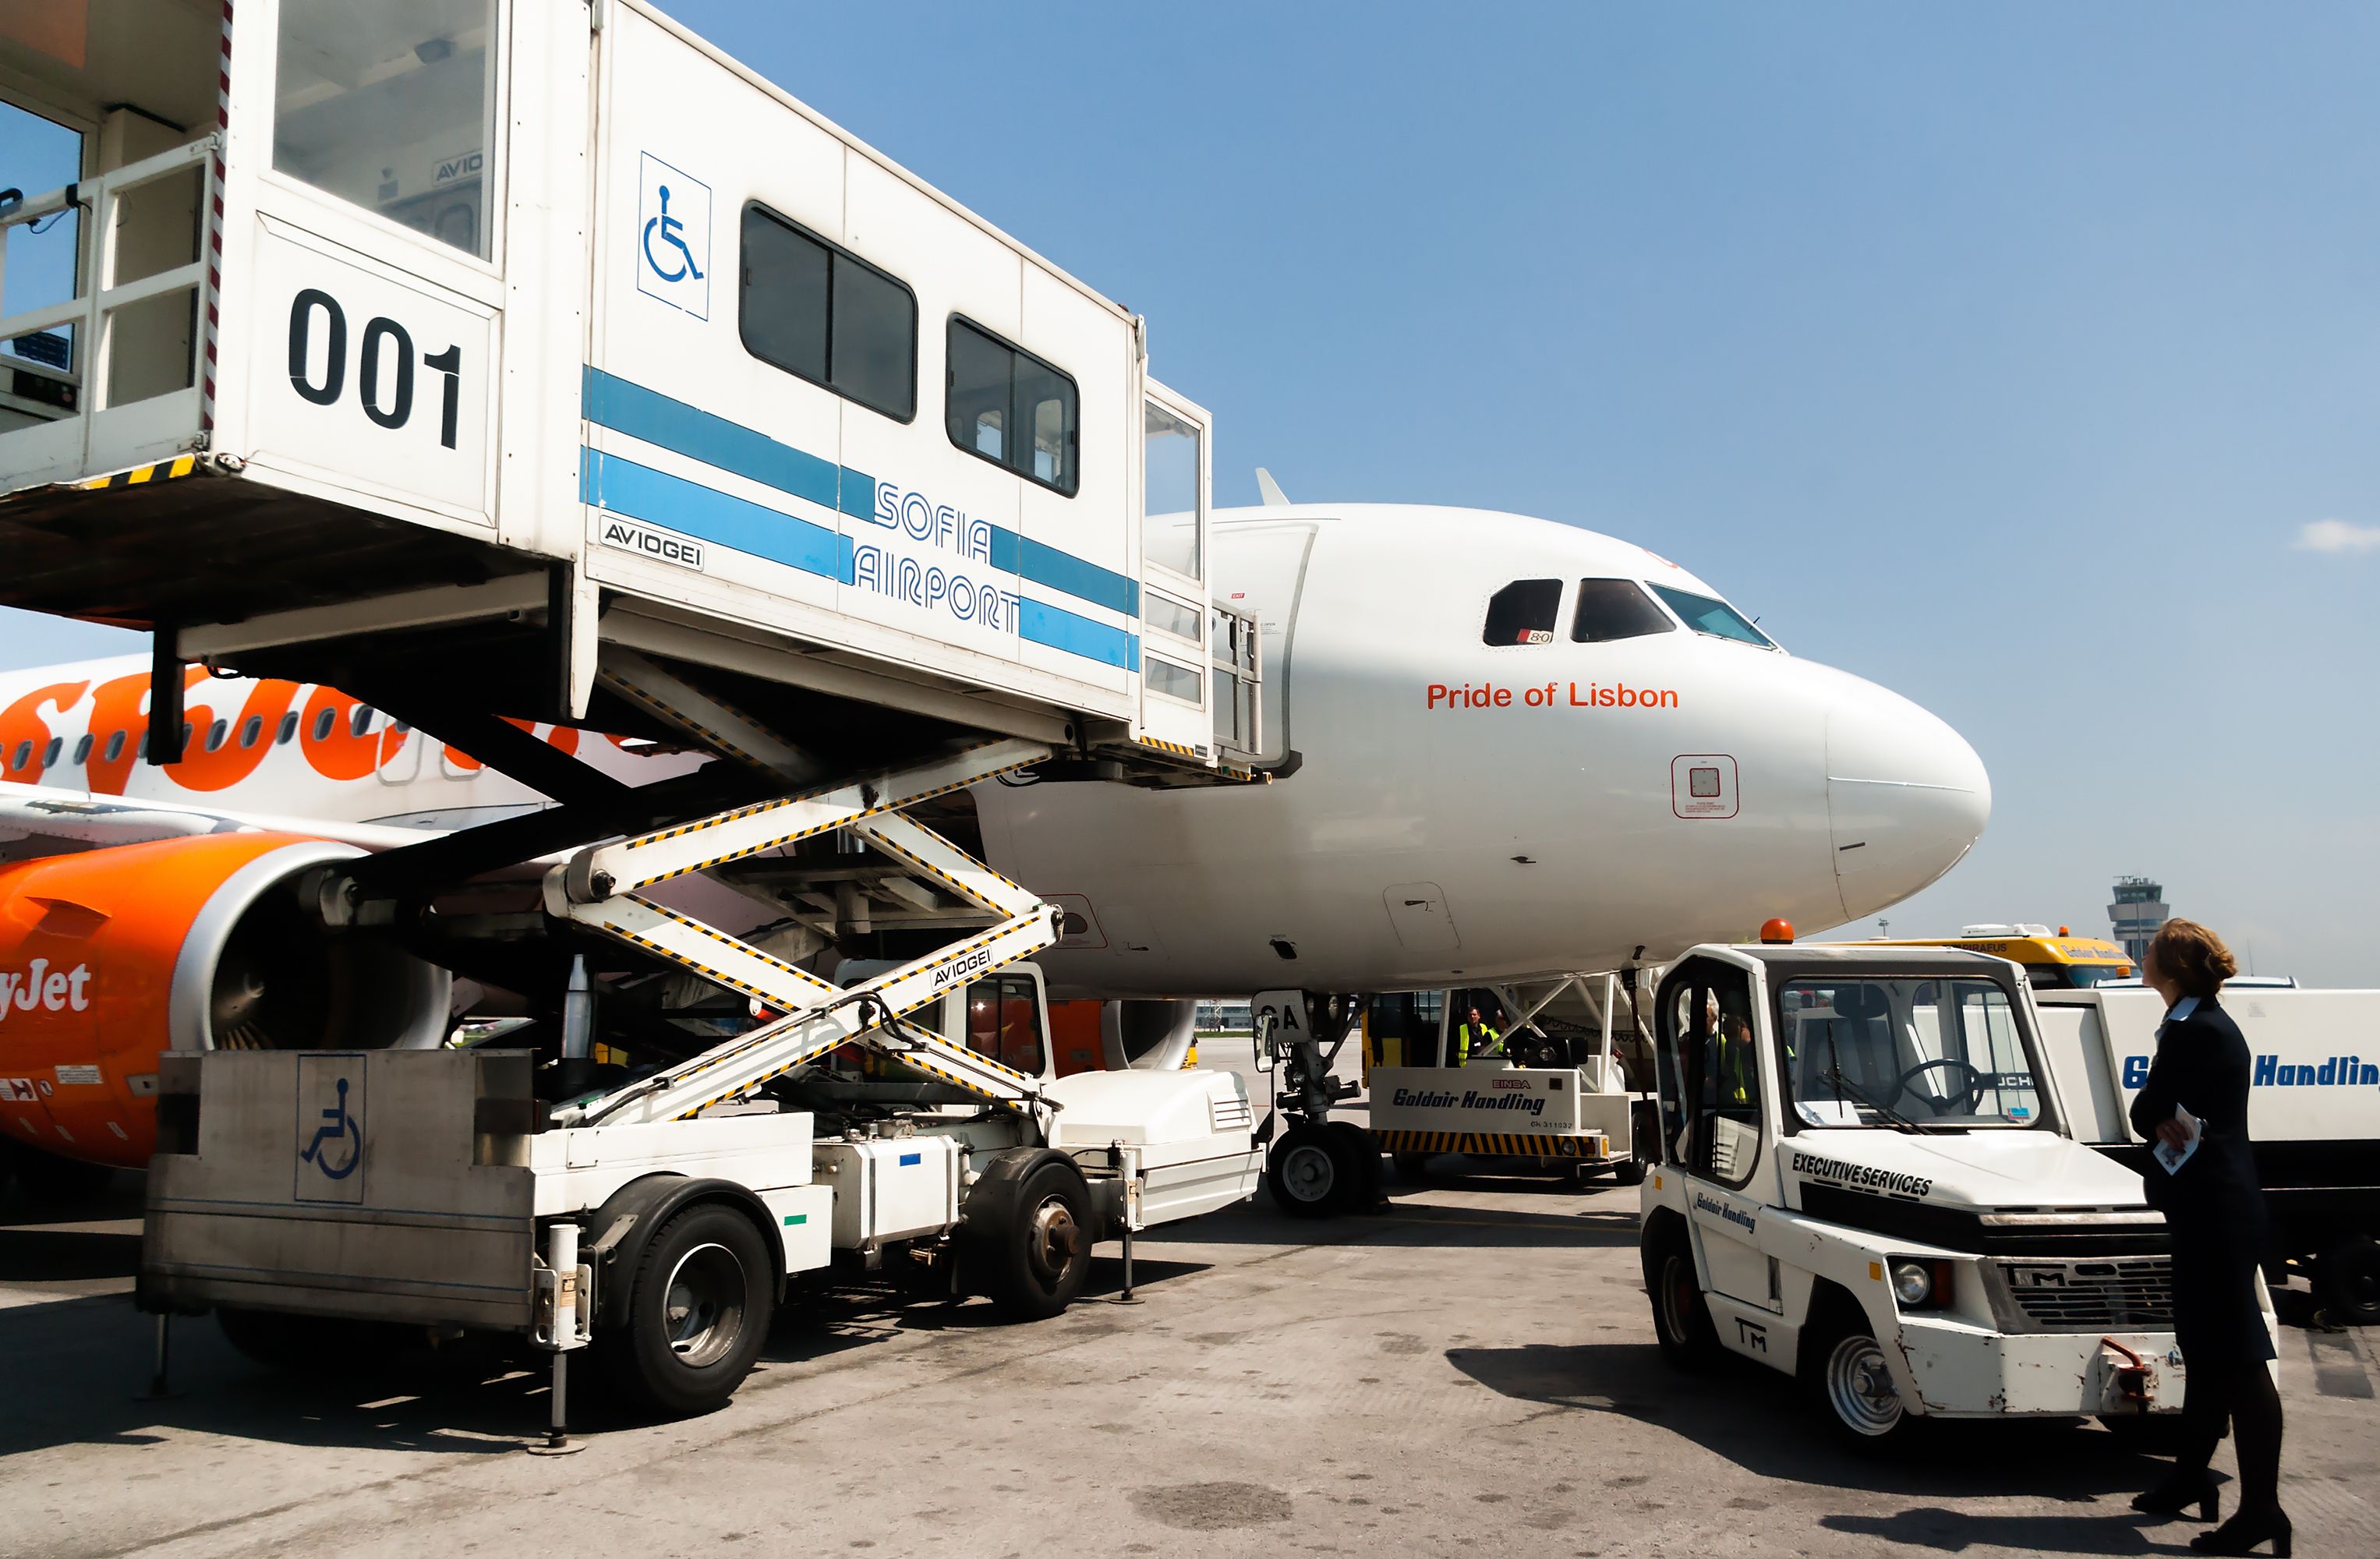 Airport passenger mobility assistance vehicle, also known as PRM, is seen in action next to an easyJet Airbus A320 at Sofia airport, Sofia, Bulgaria, April 22, 2014.